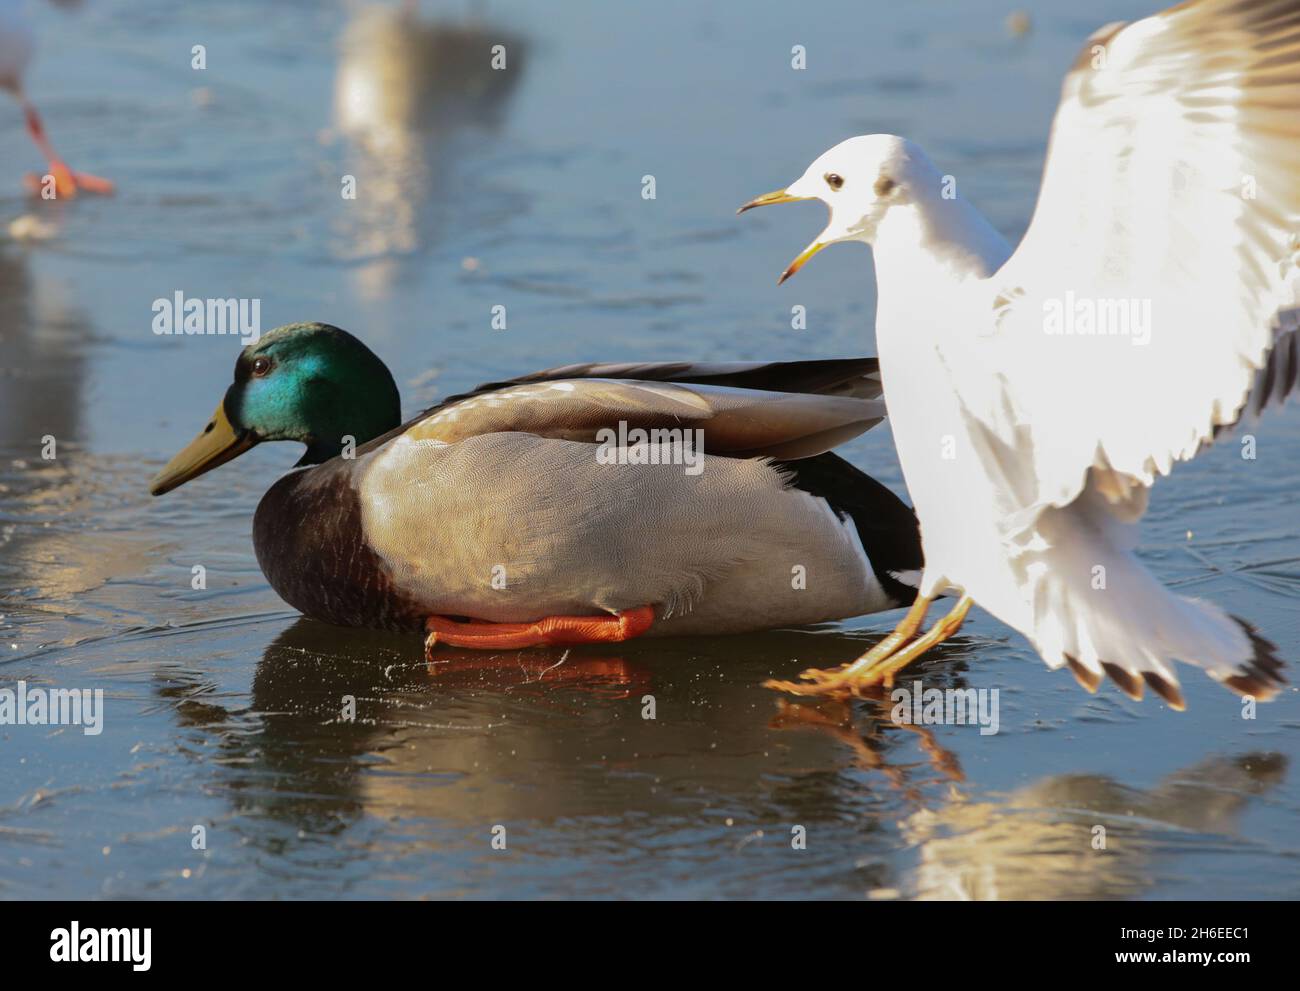 Birds slide on a icy pond in East London. Stock Photo